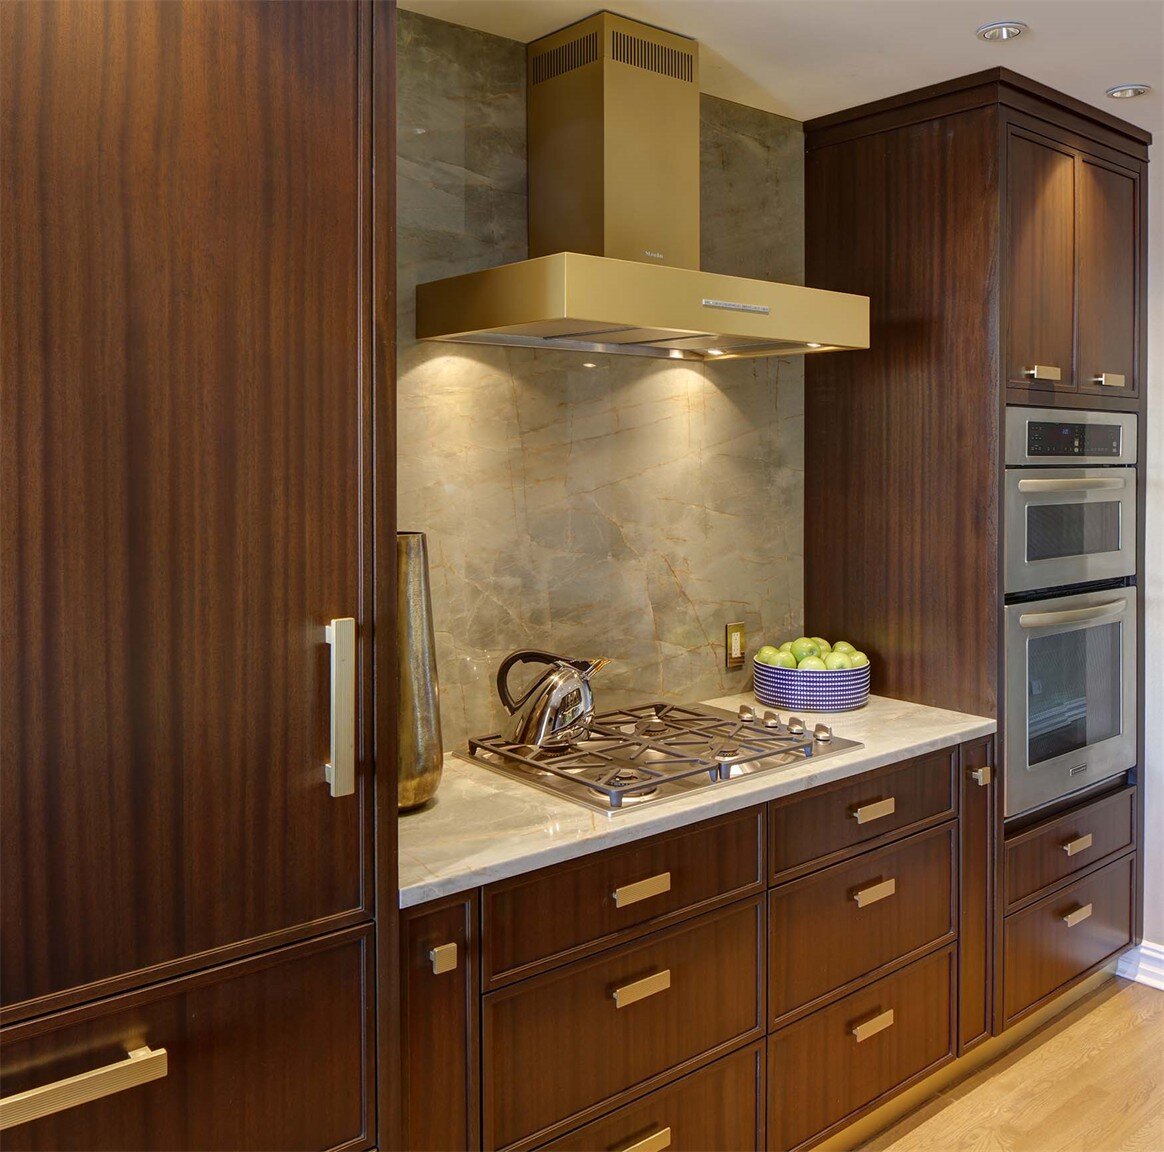 transitional-kitchen-cabinetry-060618-2.jpg